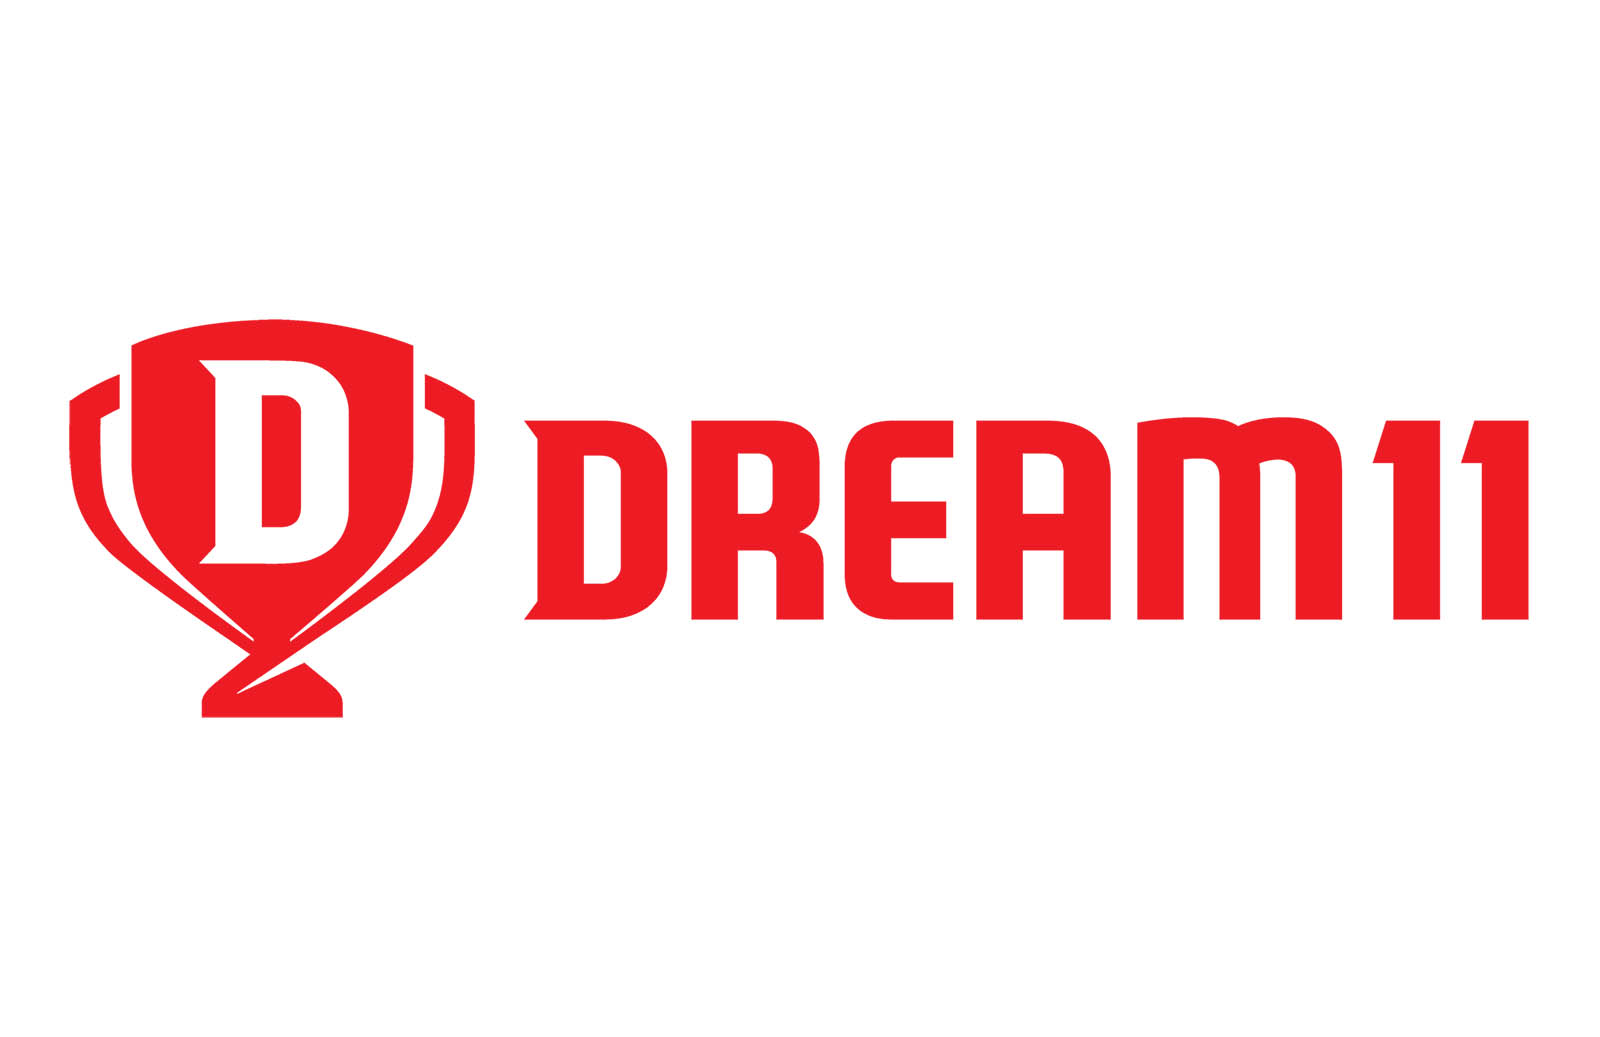 Dream11 is now the official Title Sponsor of IPL 2020